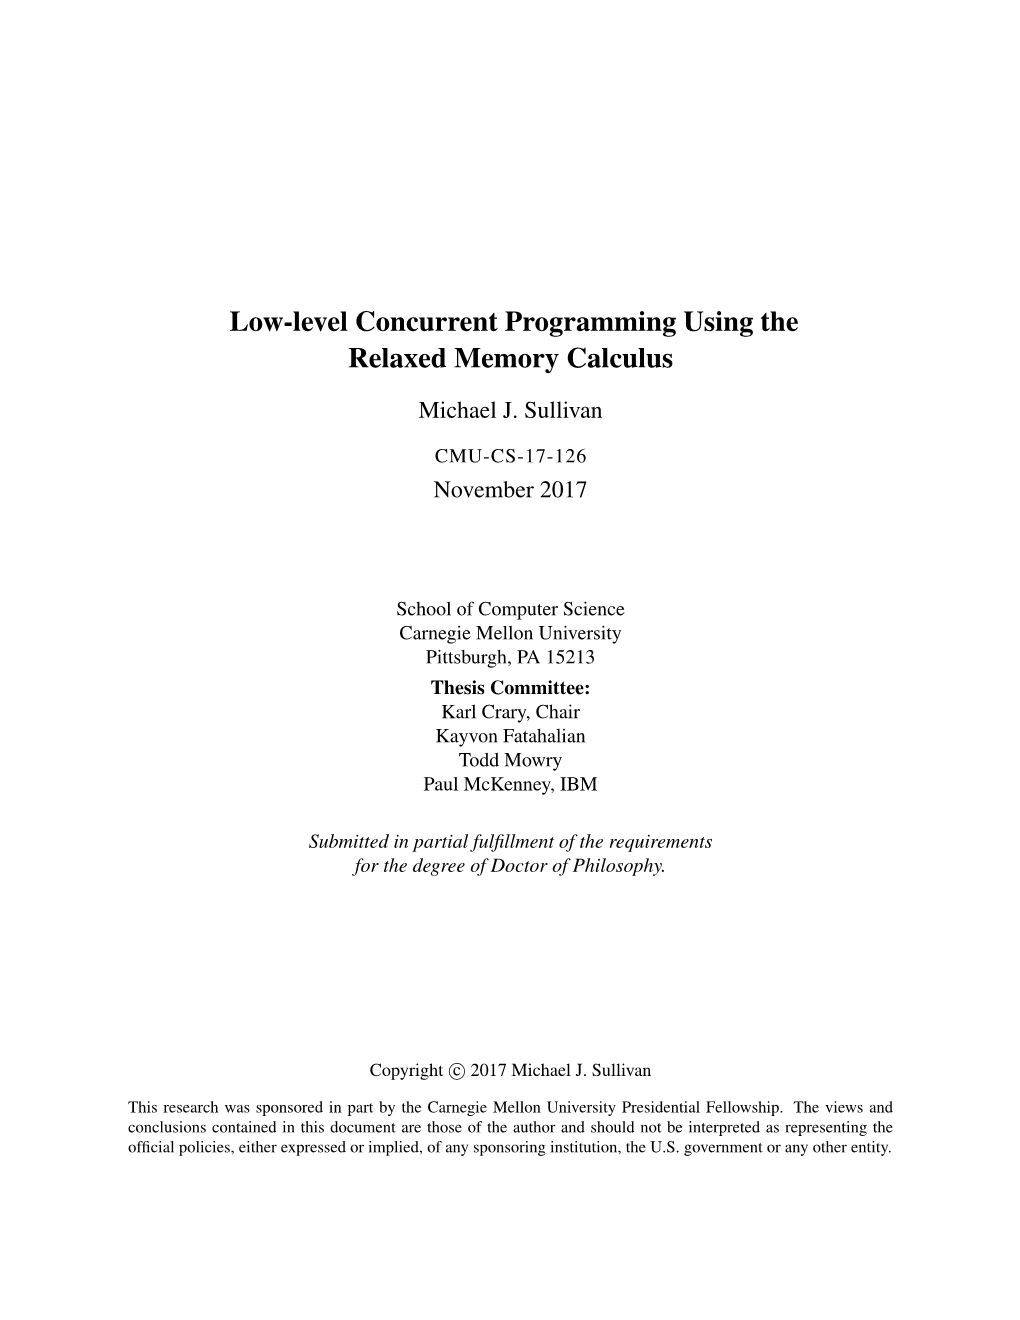 Low-Level Concurrent Programming Using the Relaxed Memory Calculus